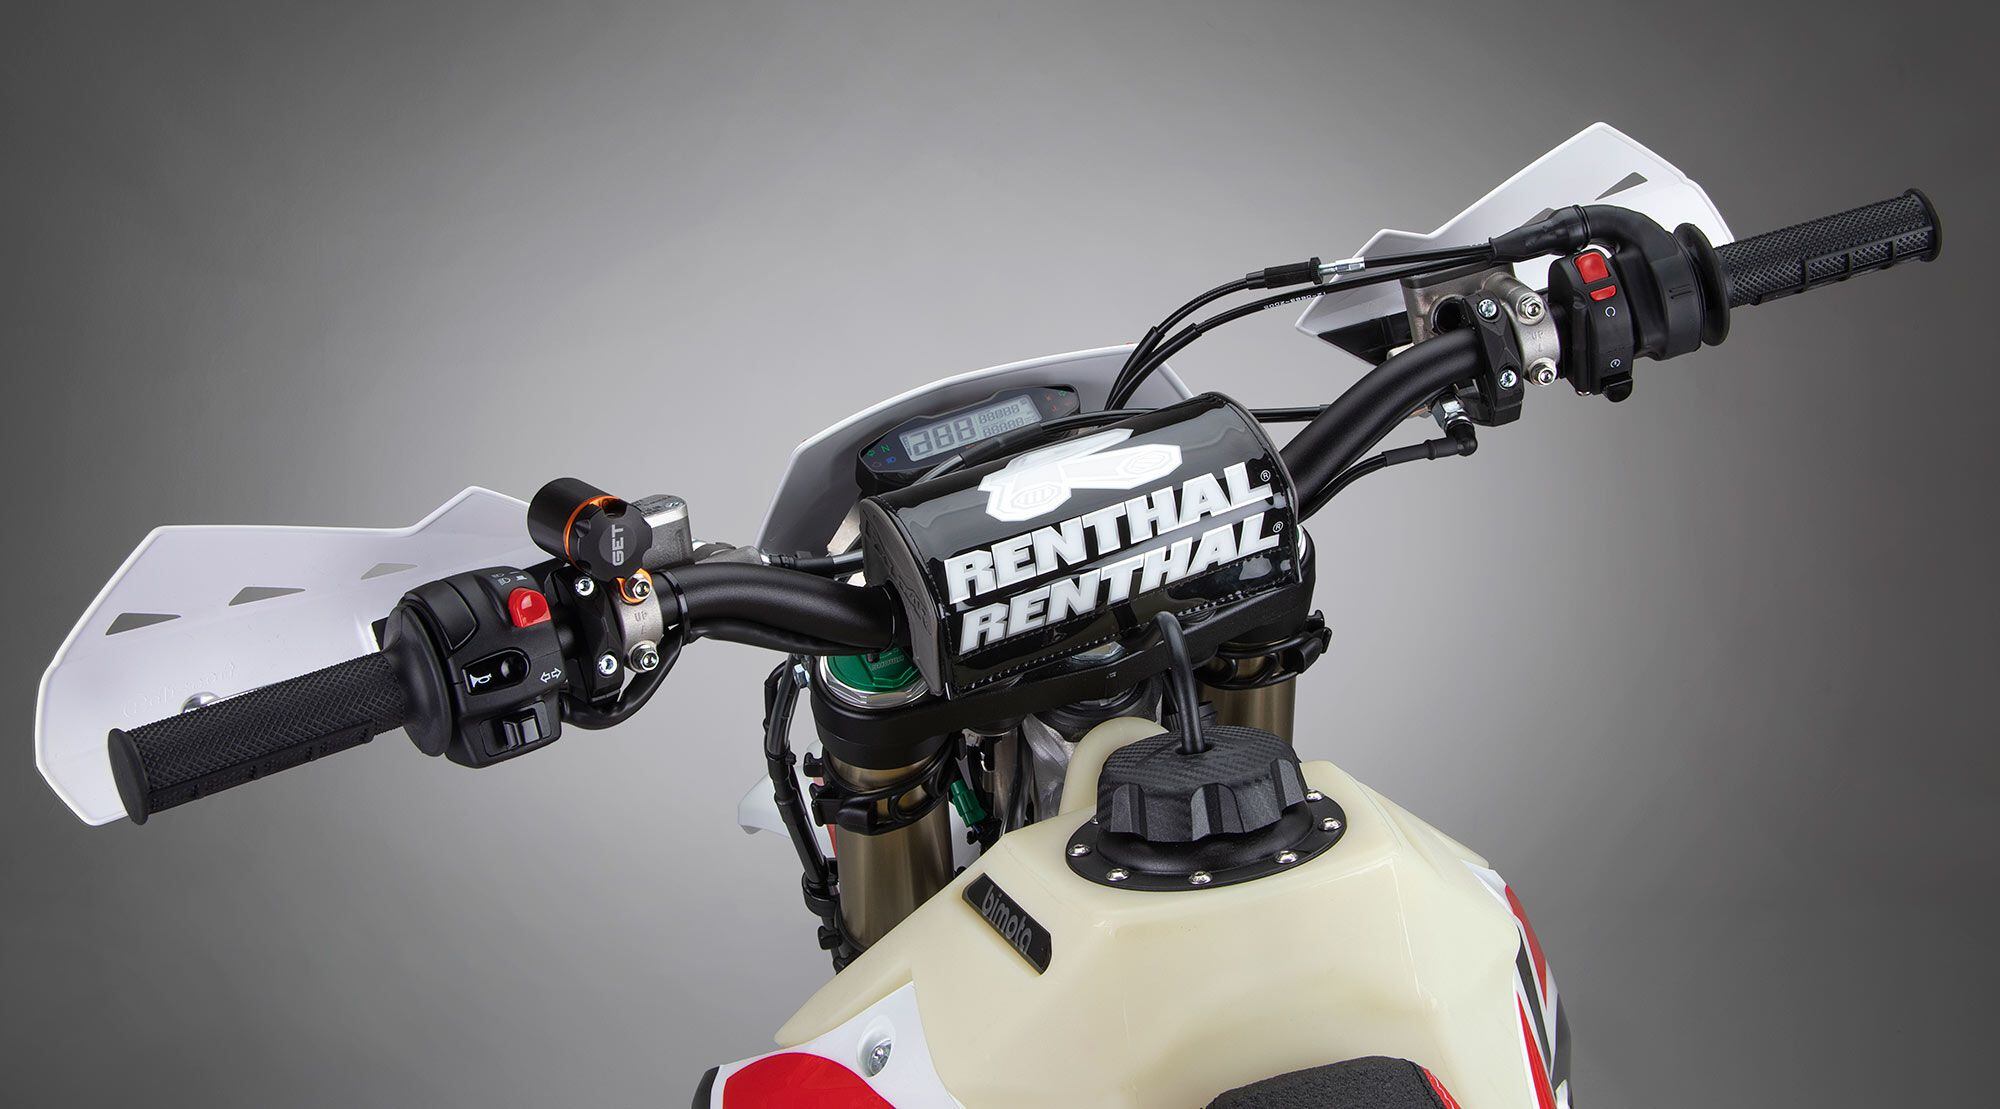 The BX450 also receives an LCD gauge for much-needed data on the trail.